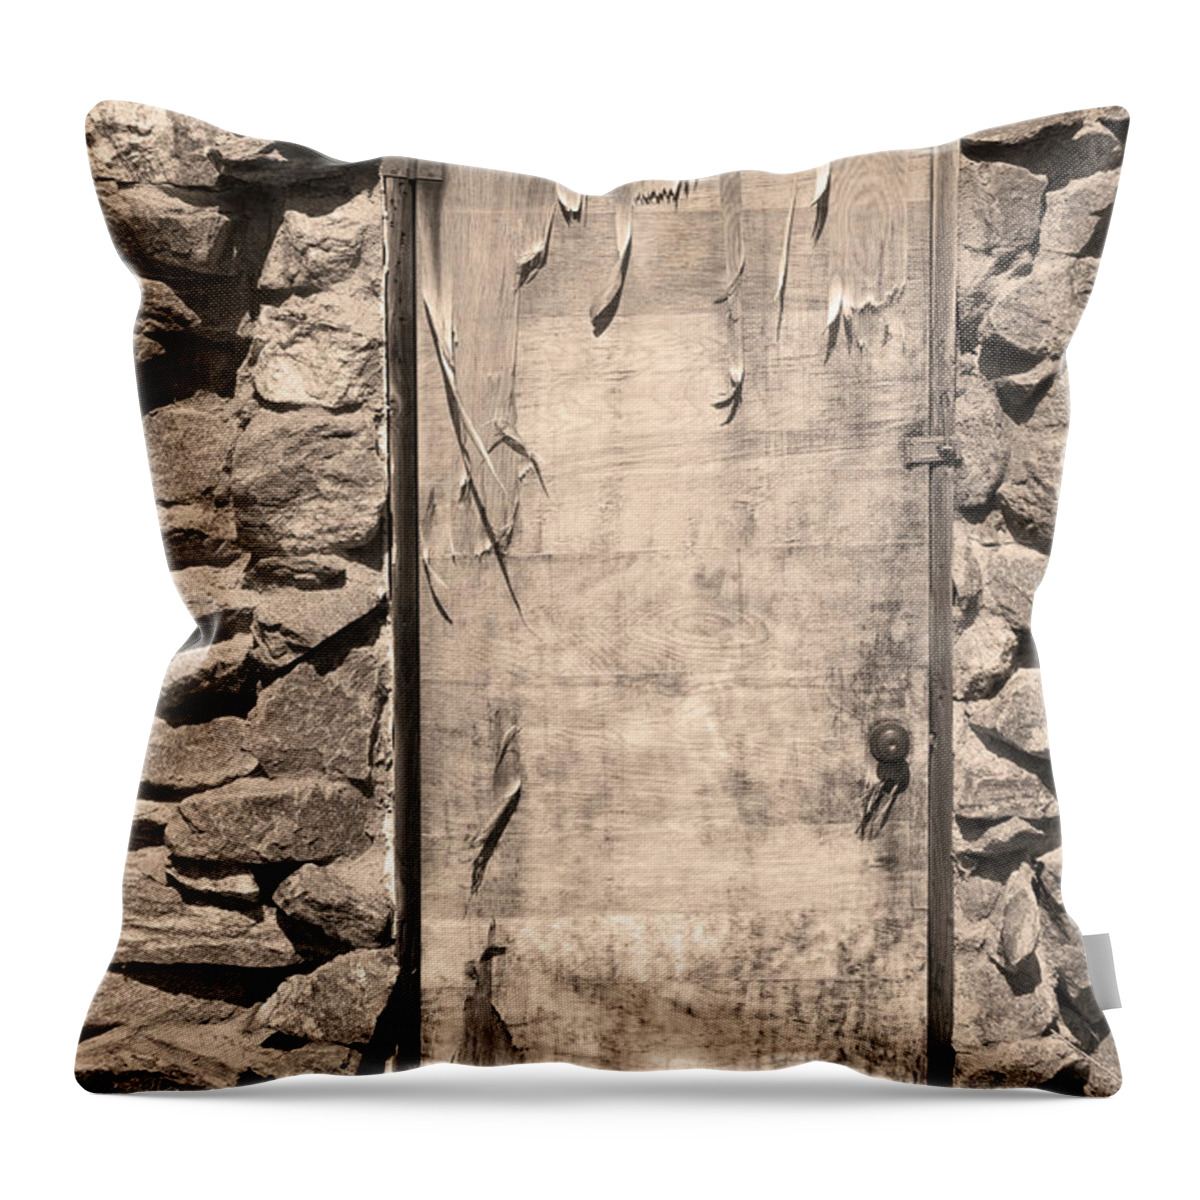 Vertical Throw Pillow featuring the photograph Old Wood Door and Stone - Vertical Sepia BW by James BO Insogna